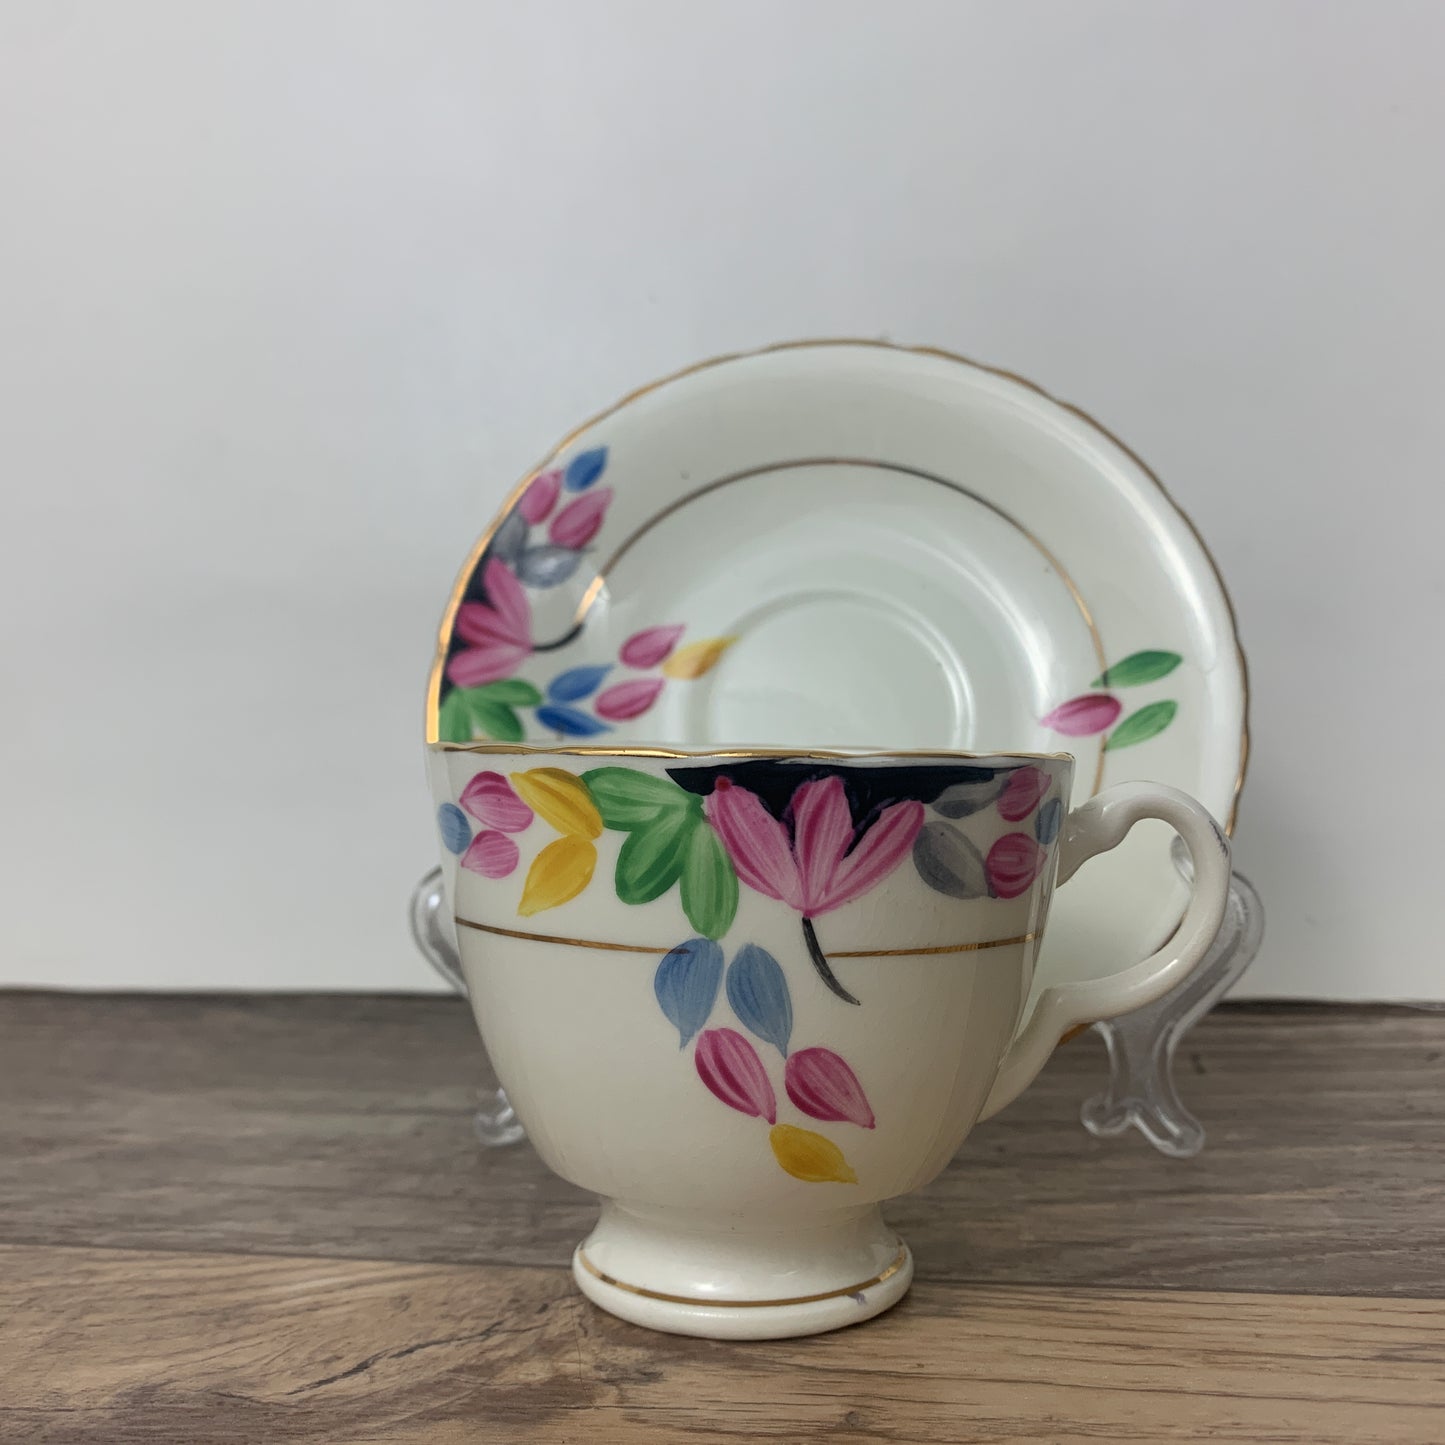 Hand Painted Floral Vintage Teacup and Saucer Set